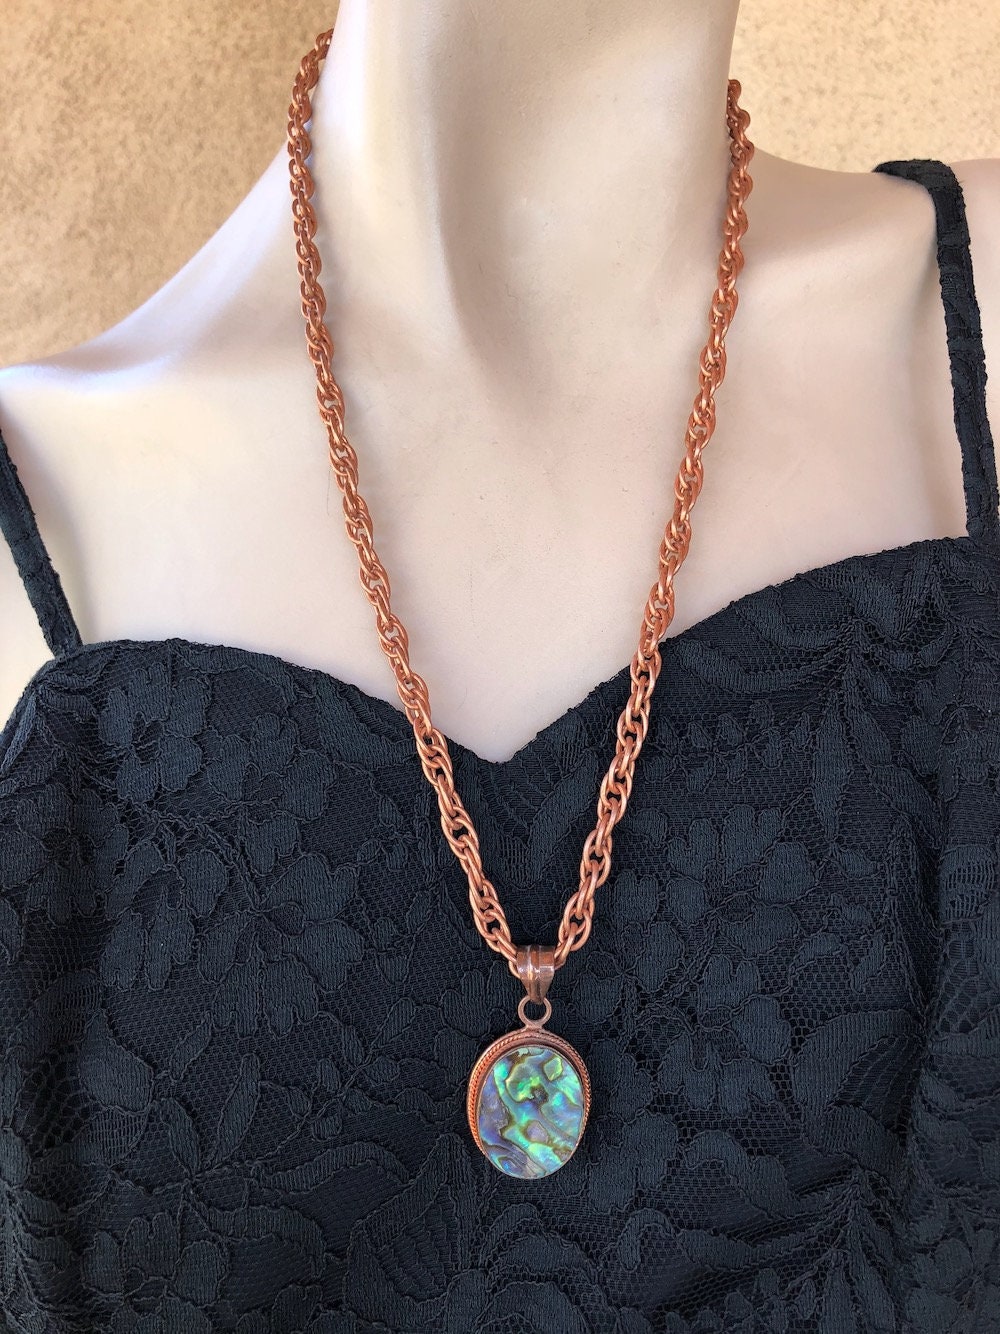 Vintage 1970s Long Abalone Copper Necklace 24 Inches | Etsy